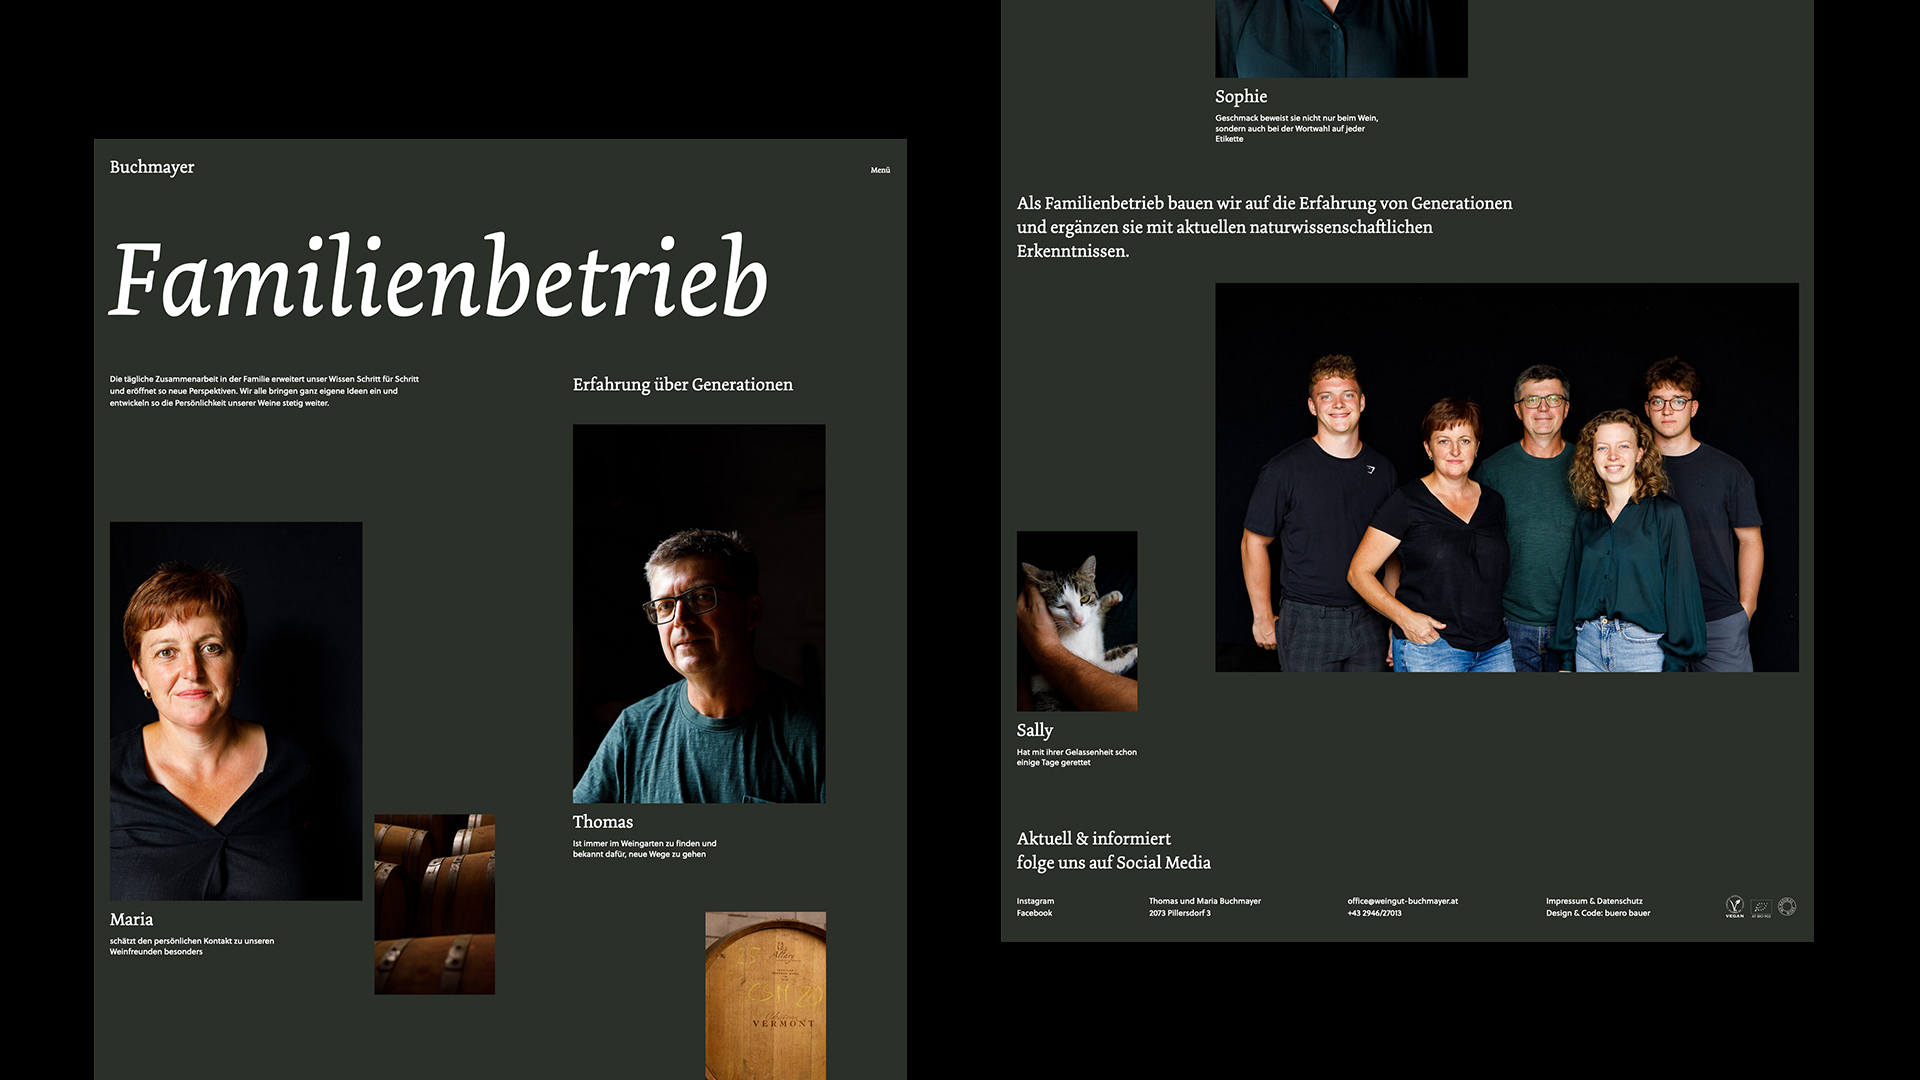 Insight on website, which also presents the family with portraits